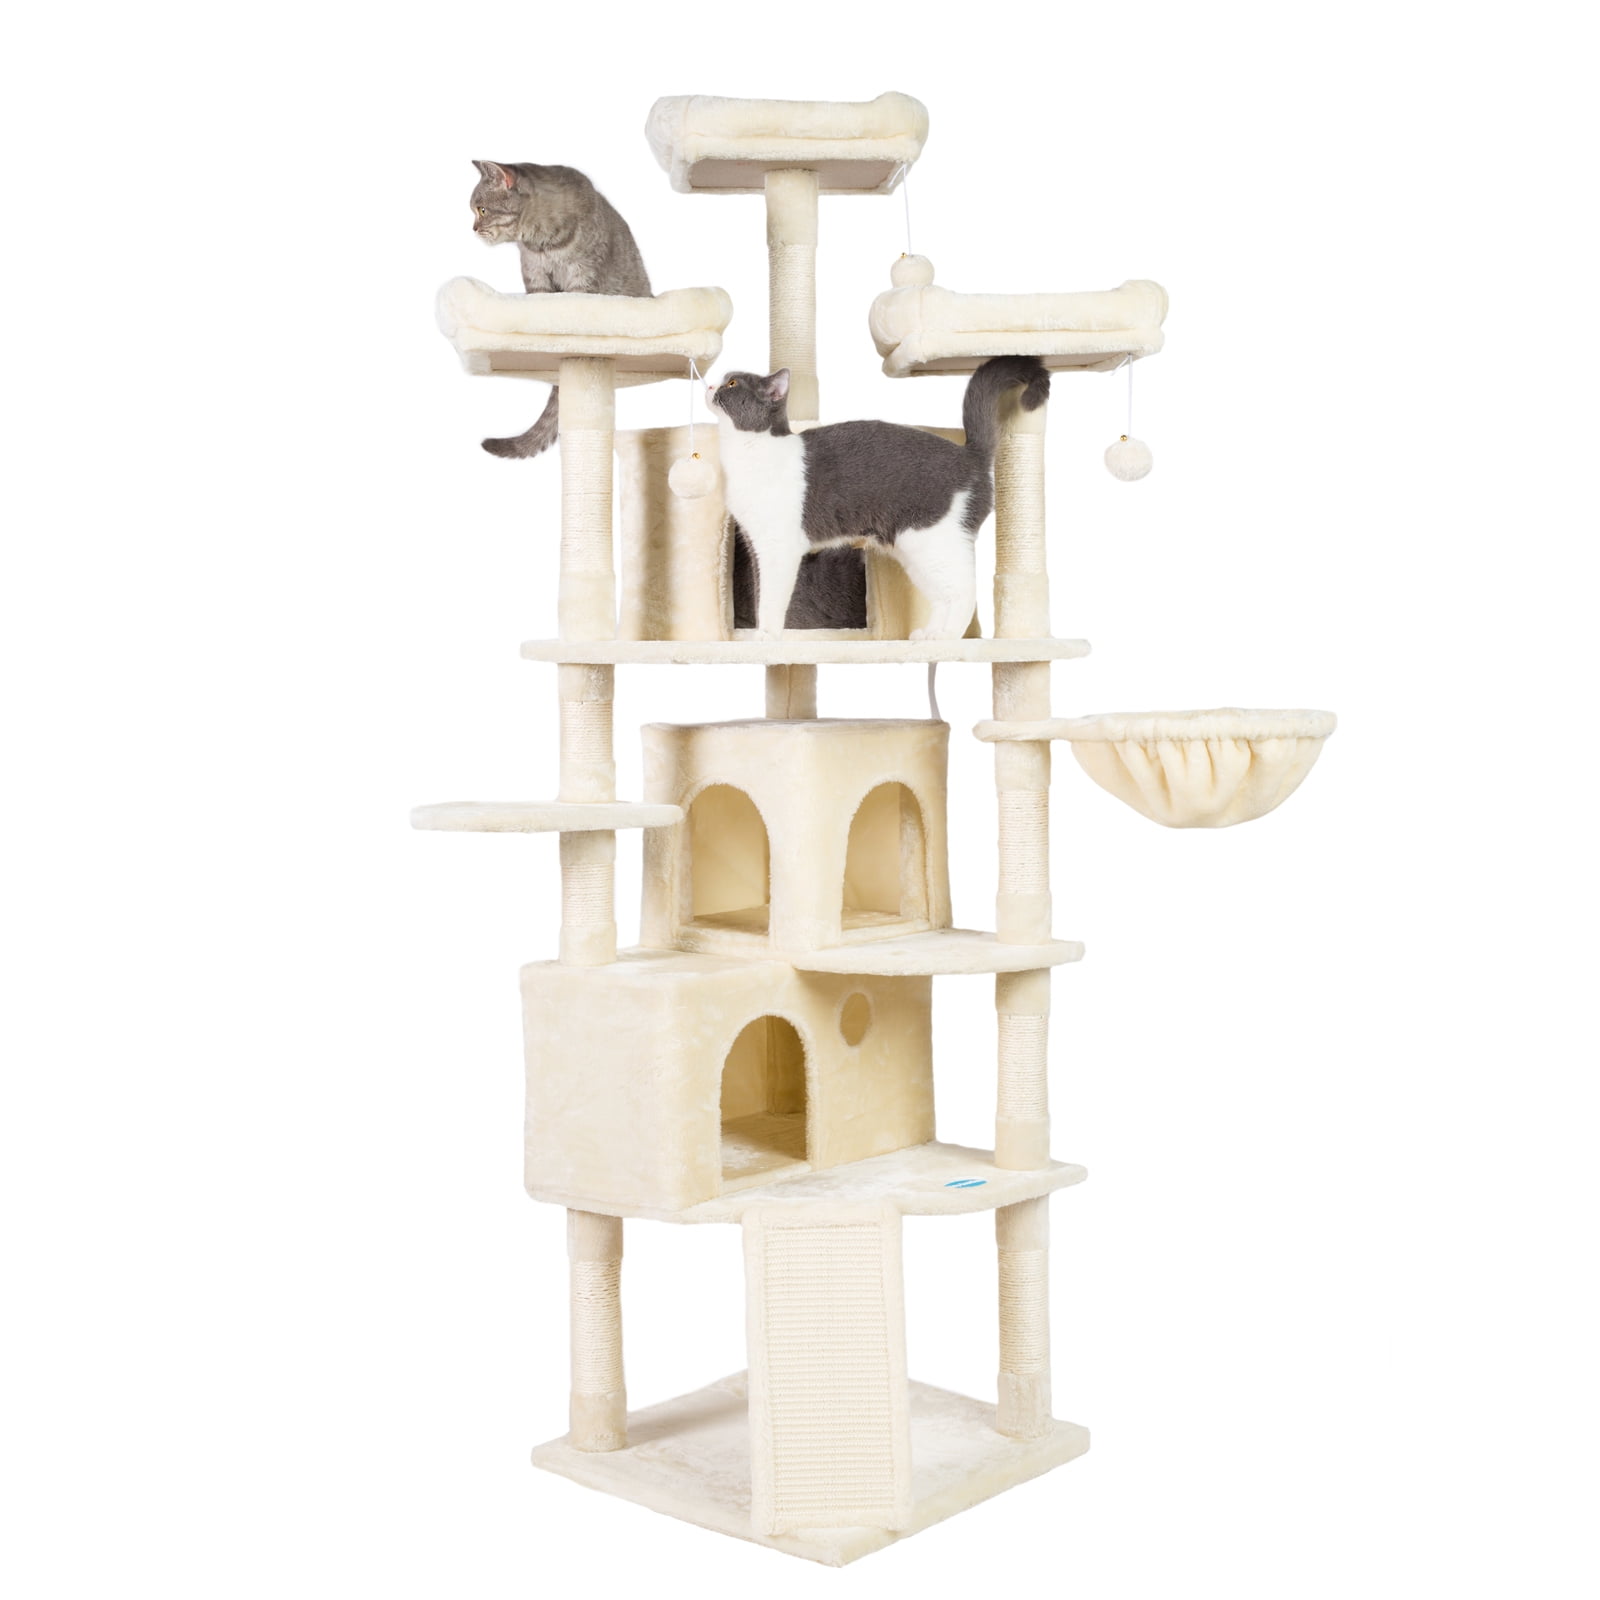 Board Cat Tower with 3 Caves Hey-brother XL Size Cat Tree Activity Center Stable for Kitten/Gig Cat Scratching Posts 3 Cozy Perches 